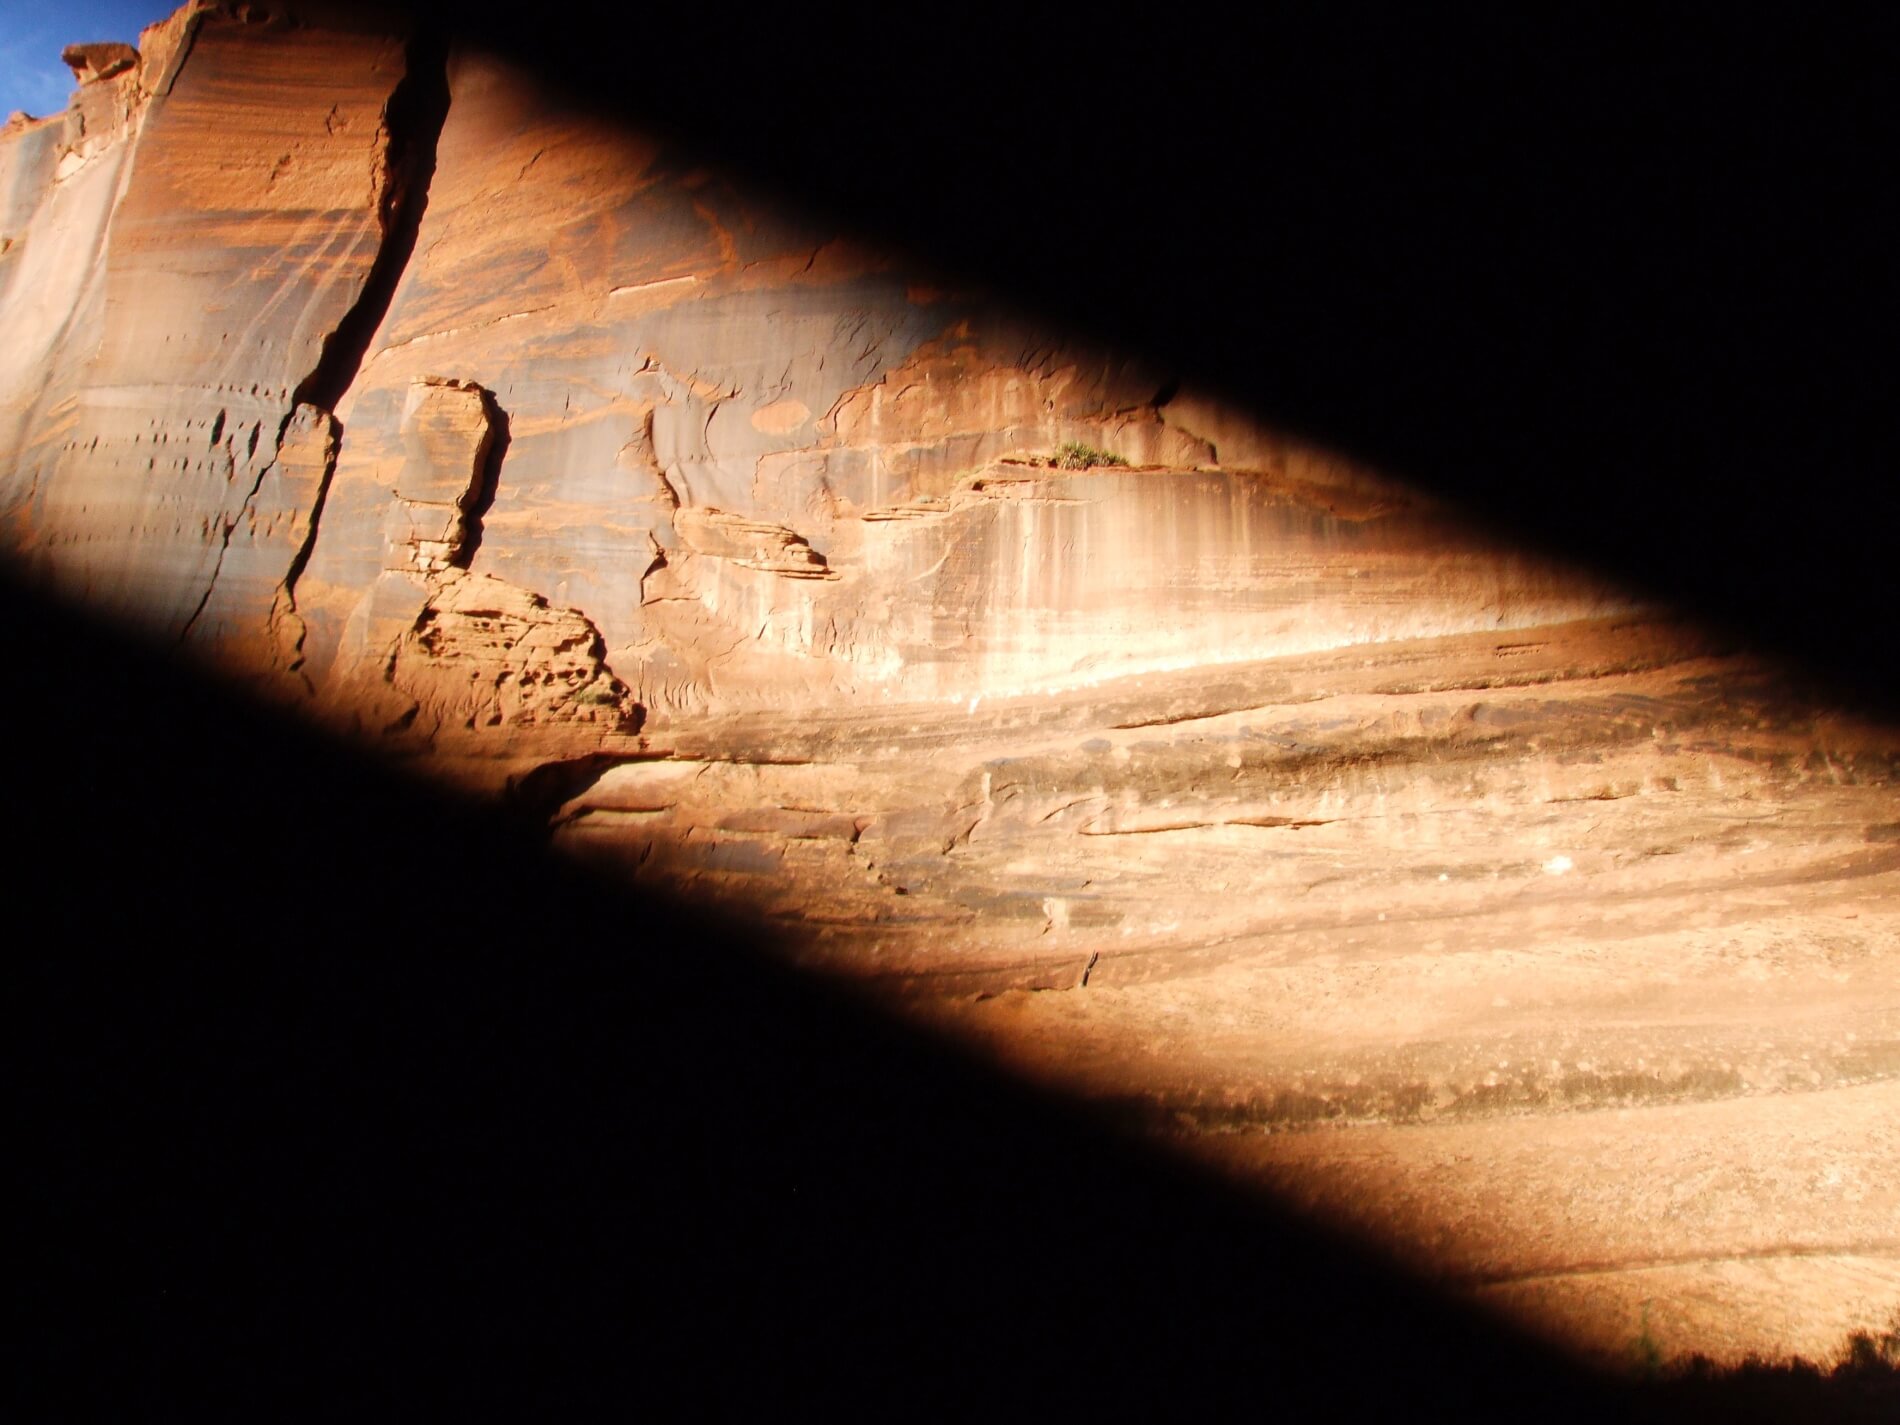 Shaft of light on the red cliff wall of Canyon de Chelly means a moment I spent absorbed while maintaining calm awareness of body and consciousness.